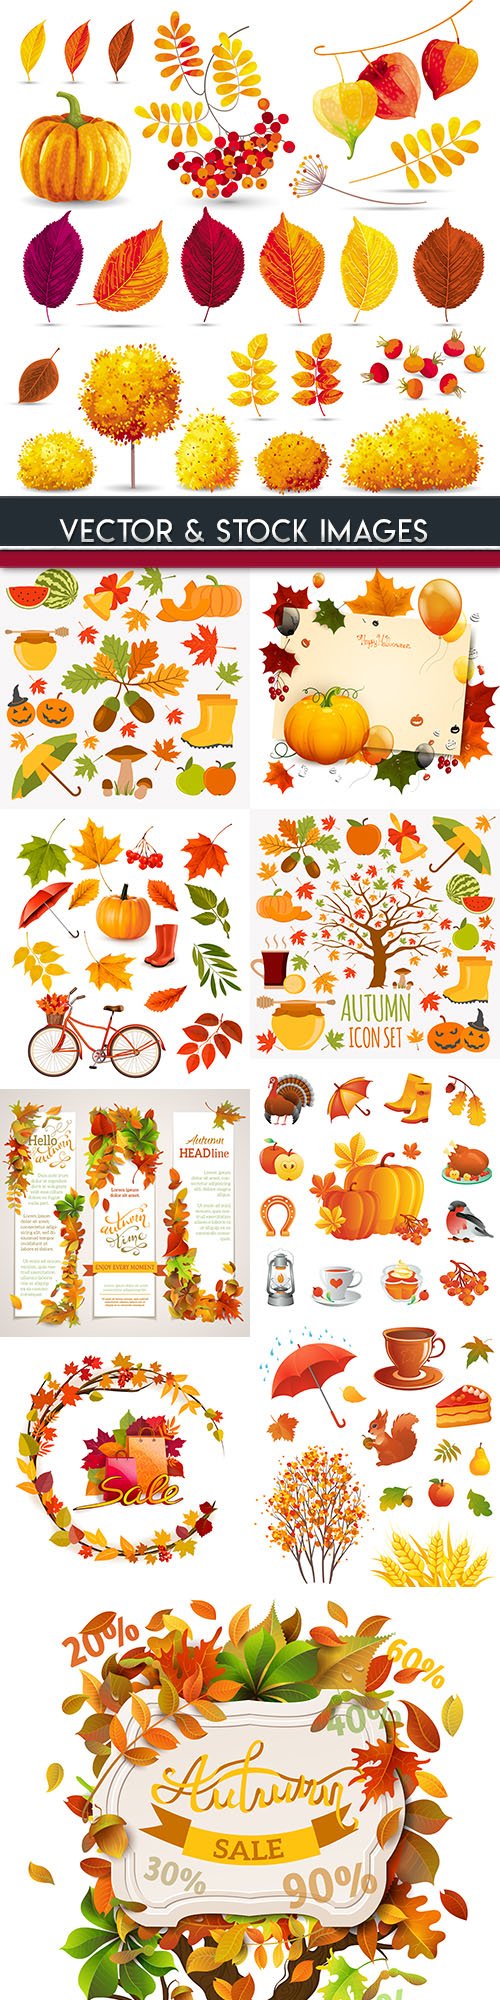 Autumn icons and leaves decorative elements design